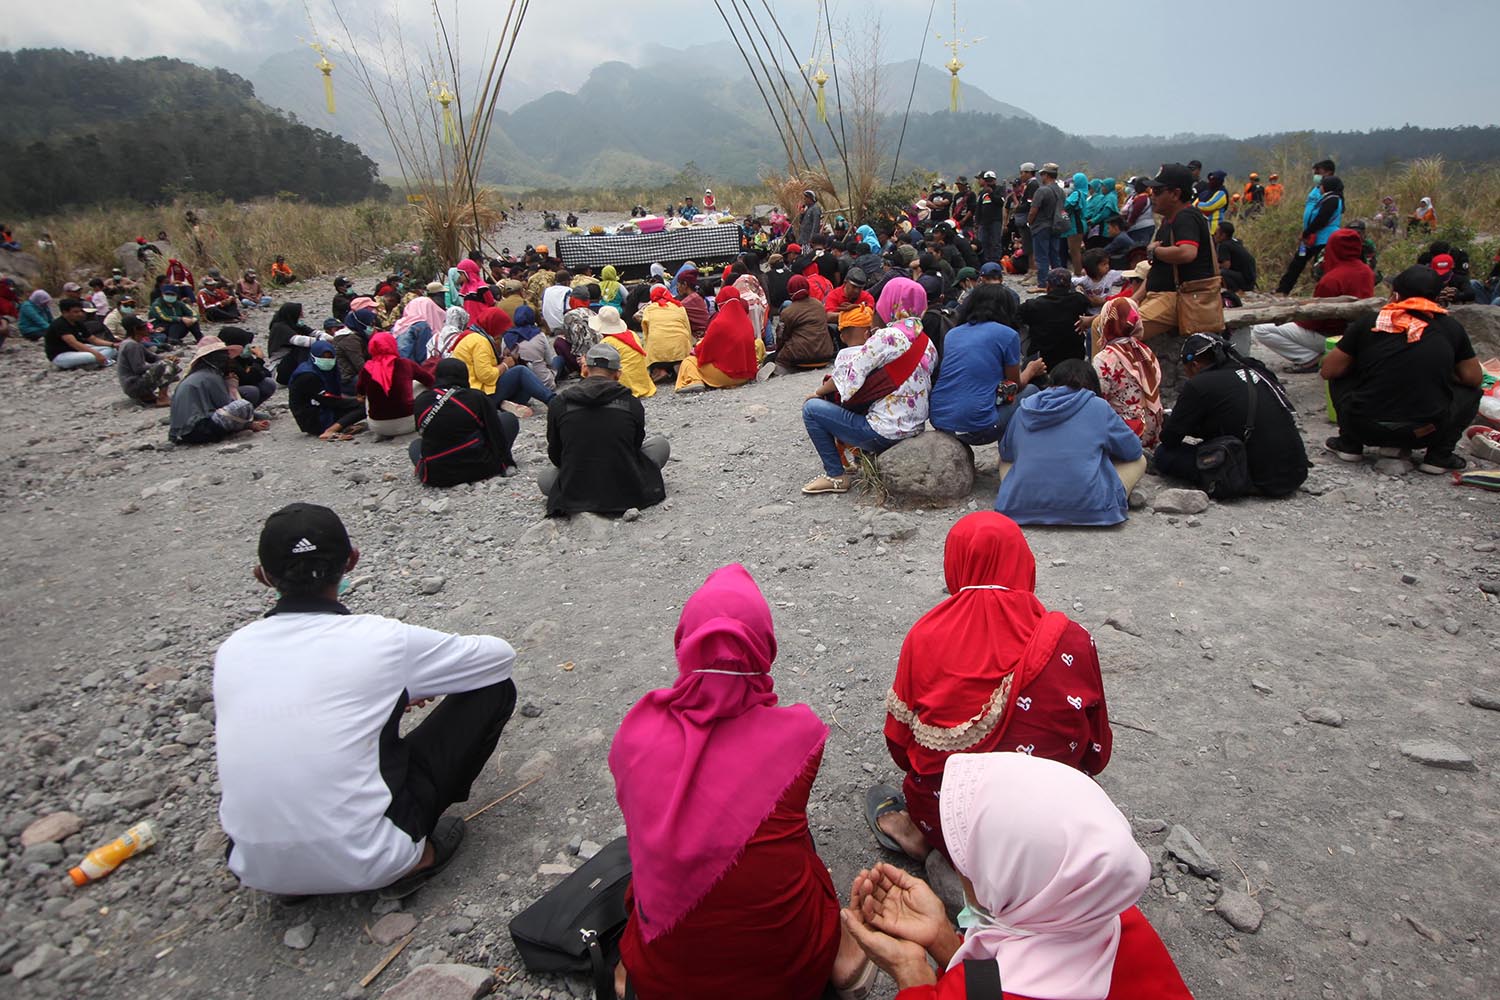 Participants sat on the volcanic ashes of Mount Merapi. JP/Boy T Harjanto